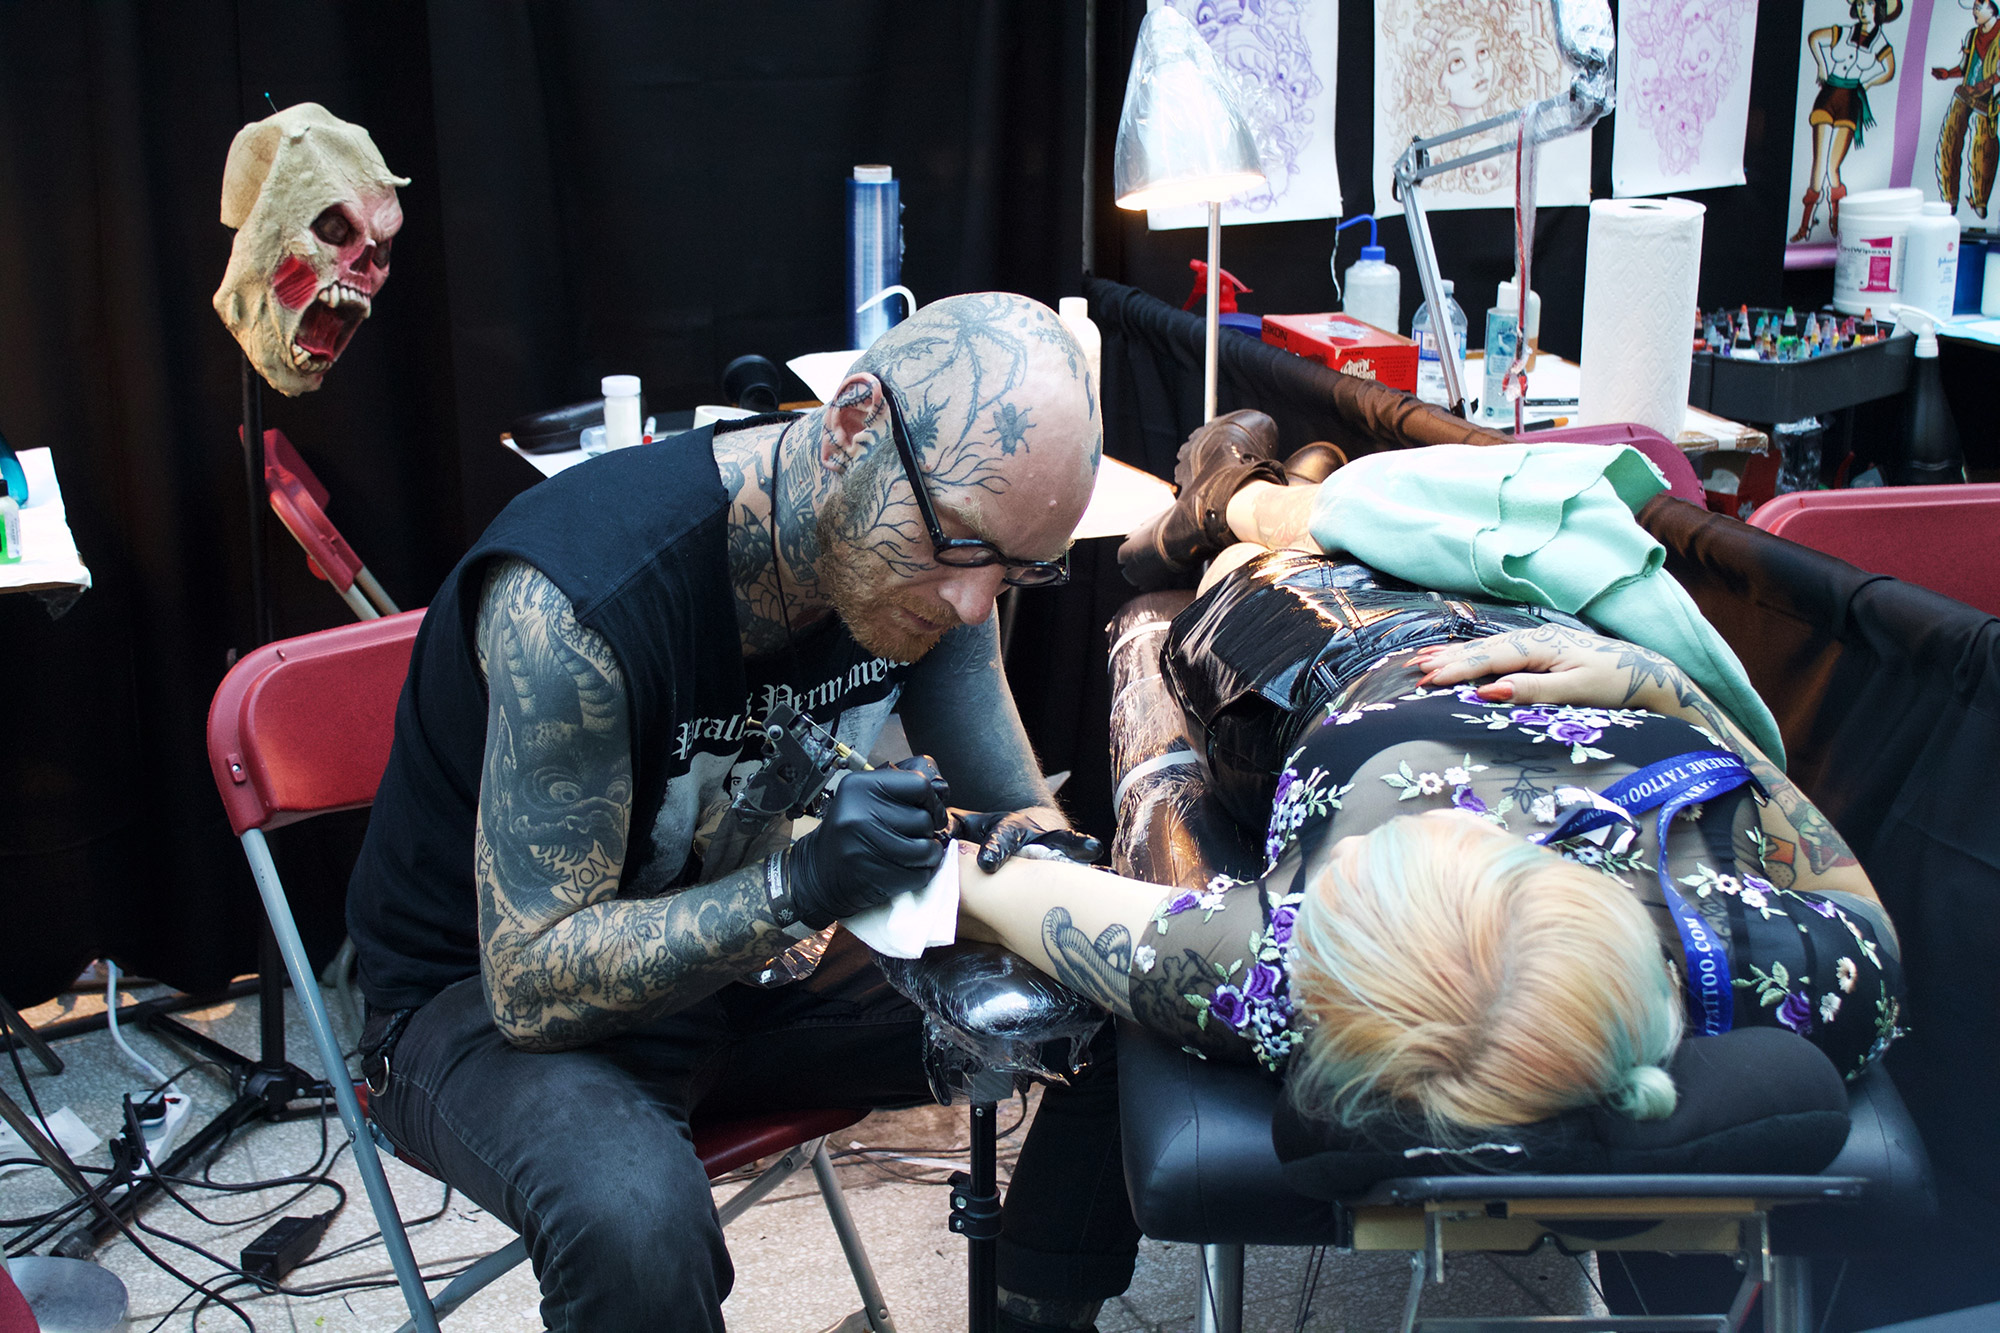 Montreal model and artist known as Zombie Boy dead at 32  CBC News